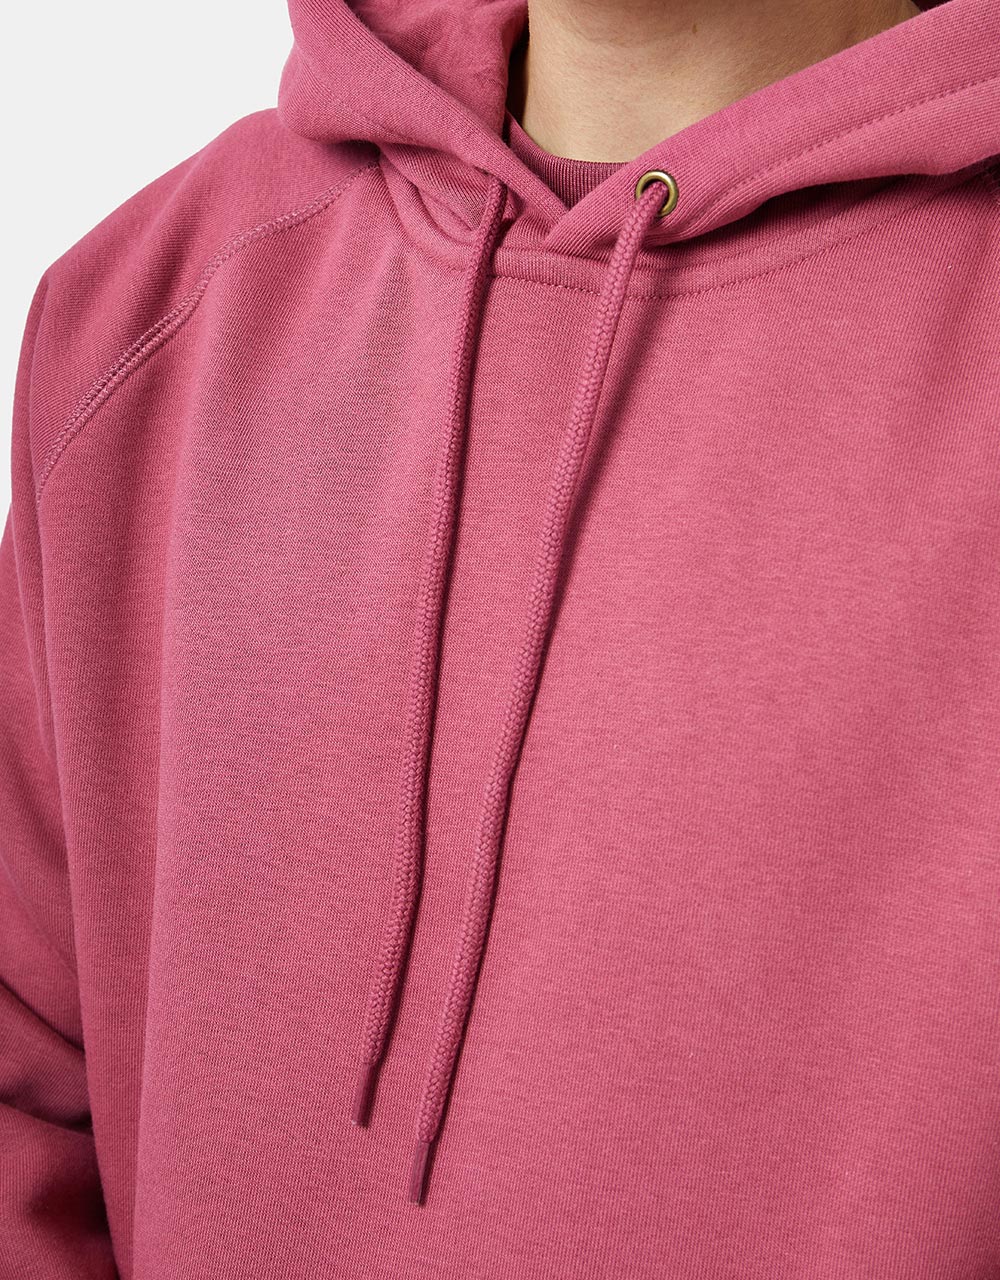 Carhartt WIP Hooded Chase Sweatshirt - Punch/Gold